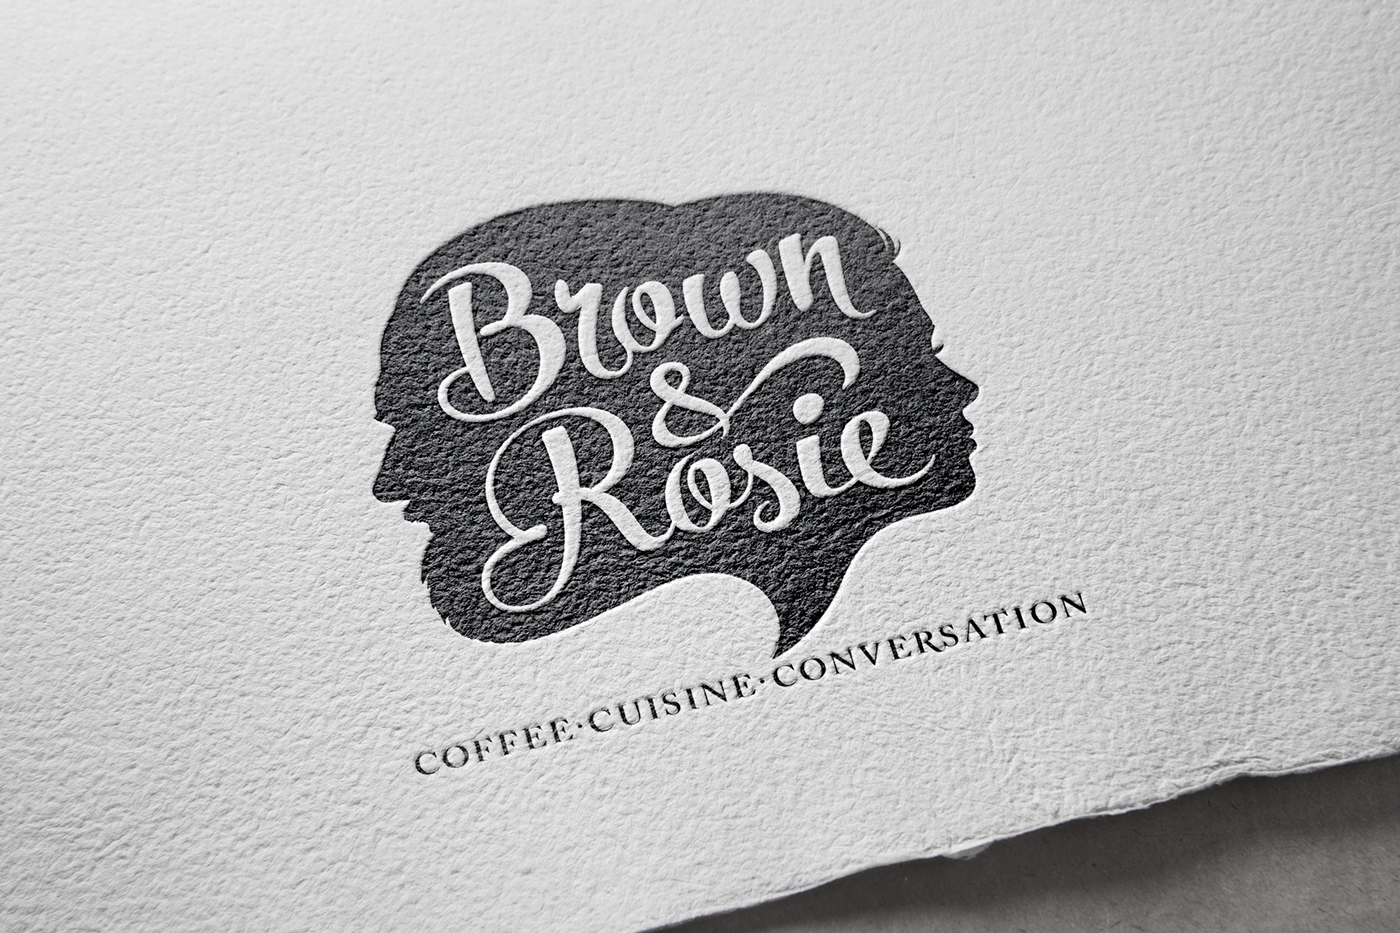 logo coffee cup cafe London cafe london coffee Brown and Rosie coffee shop